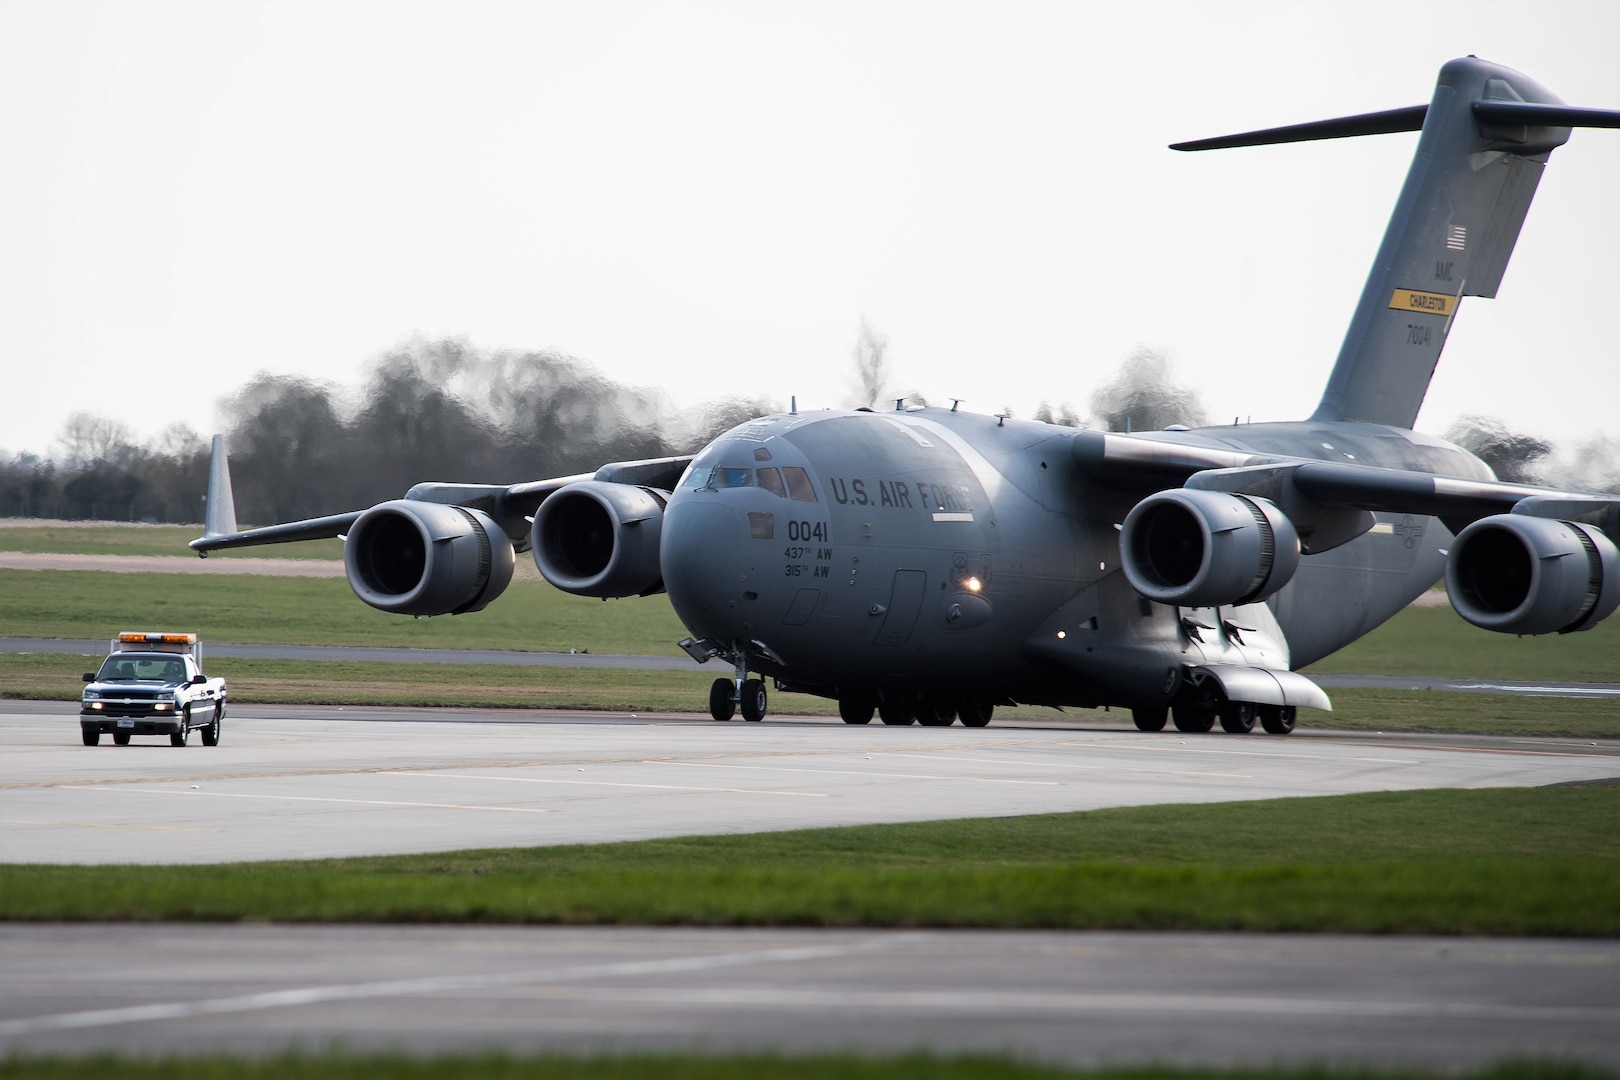 A C-17 Globemaster III from Charleston Air Force Base, S.C., taxis down the flight line at RAF Fairford, England, March 9, 2019. Multiple C-17s were required to deliver all the support equipment needed to support the U.S. Strategic Command Bomber Task Force (BTF) in Europe. (U.S. Air Force photo by Airman 1st Class Tessa B. Corrick)